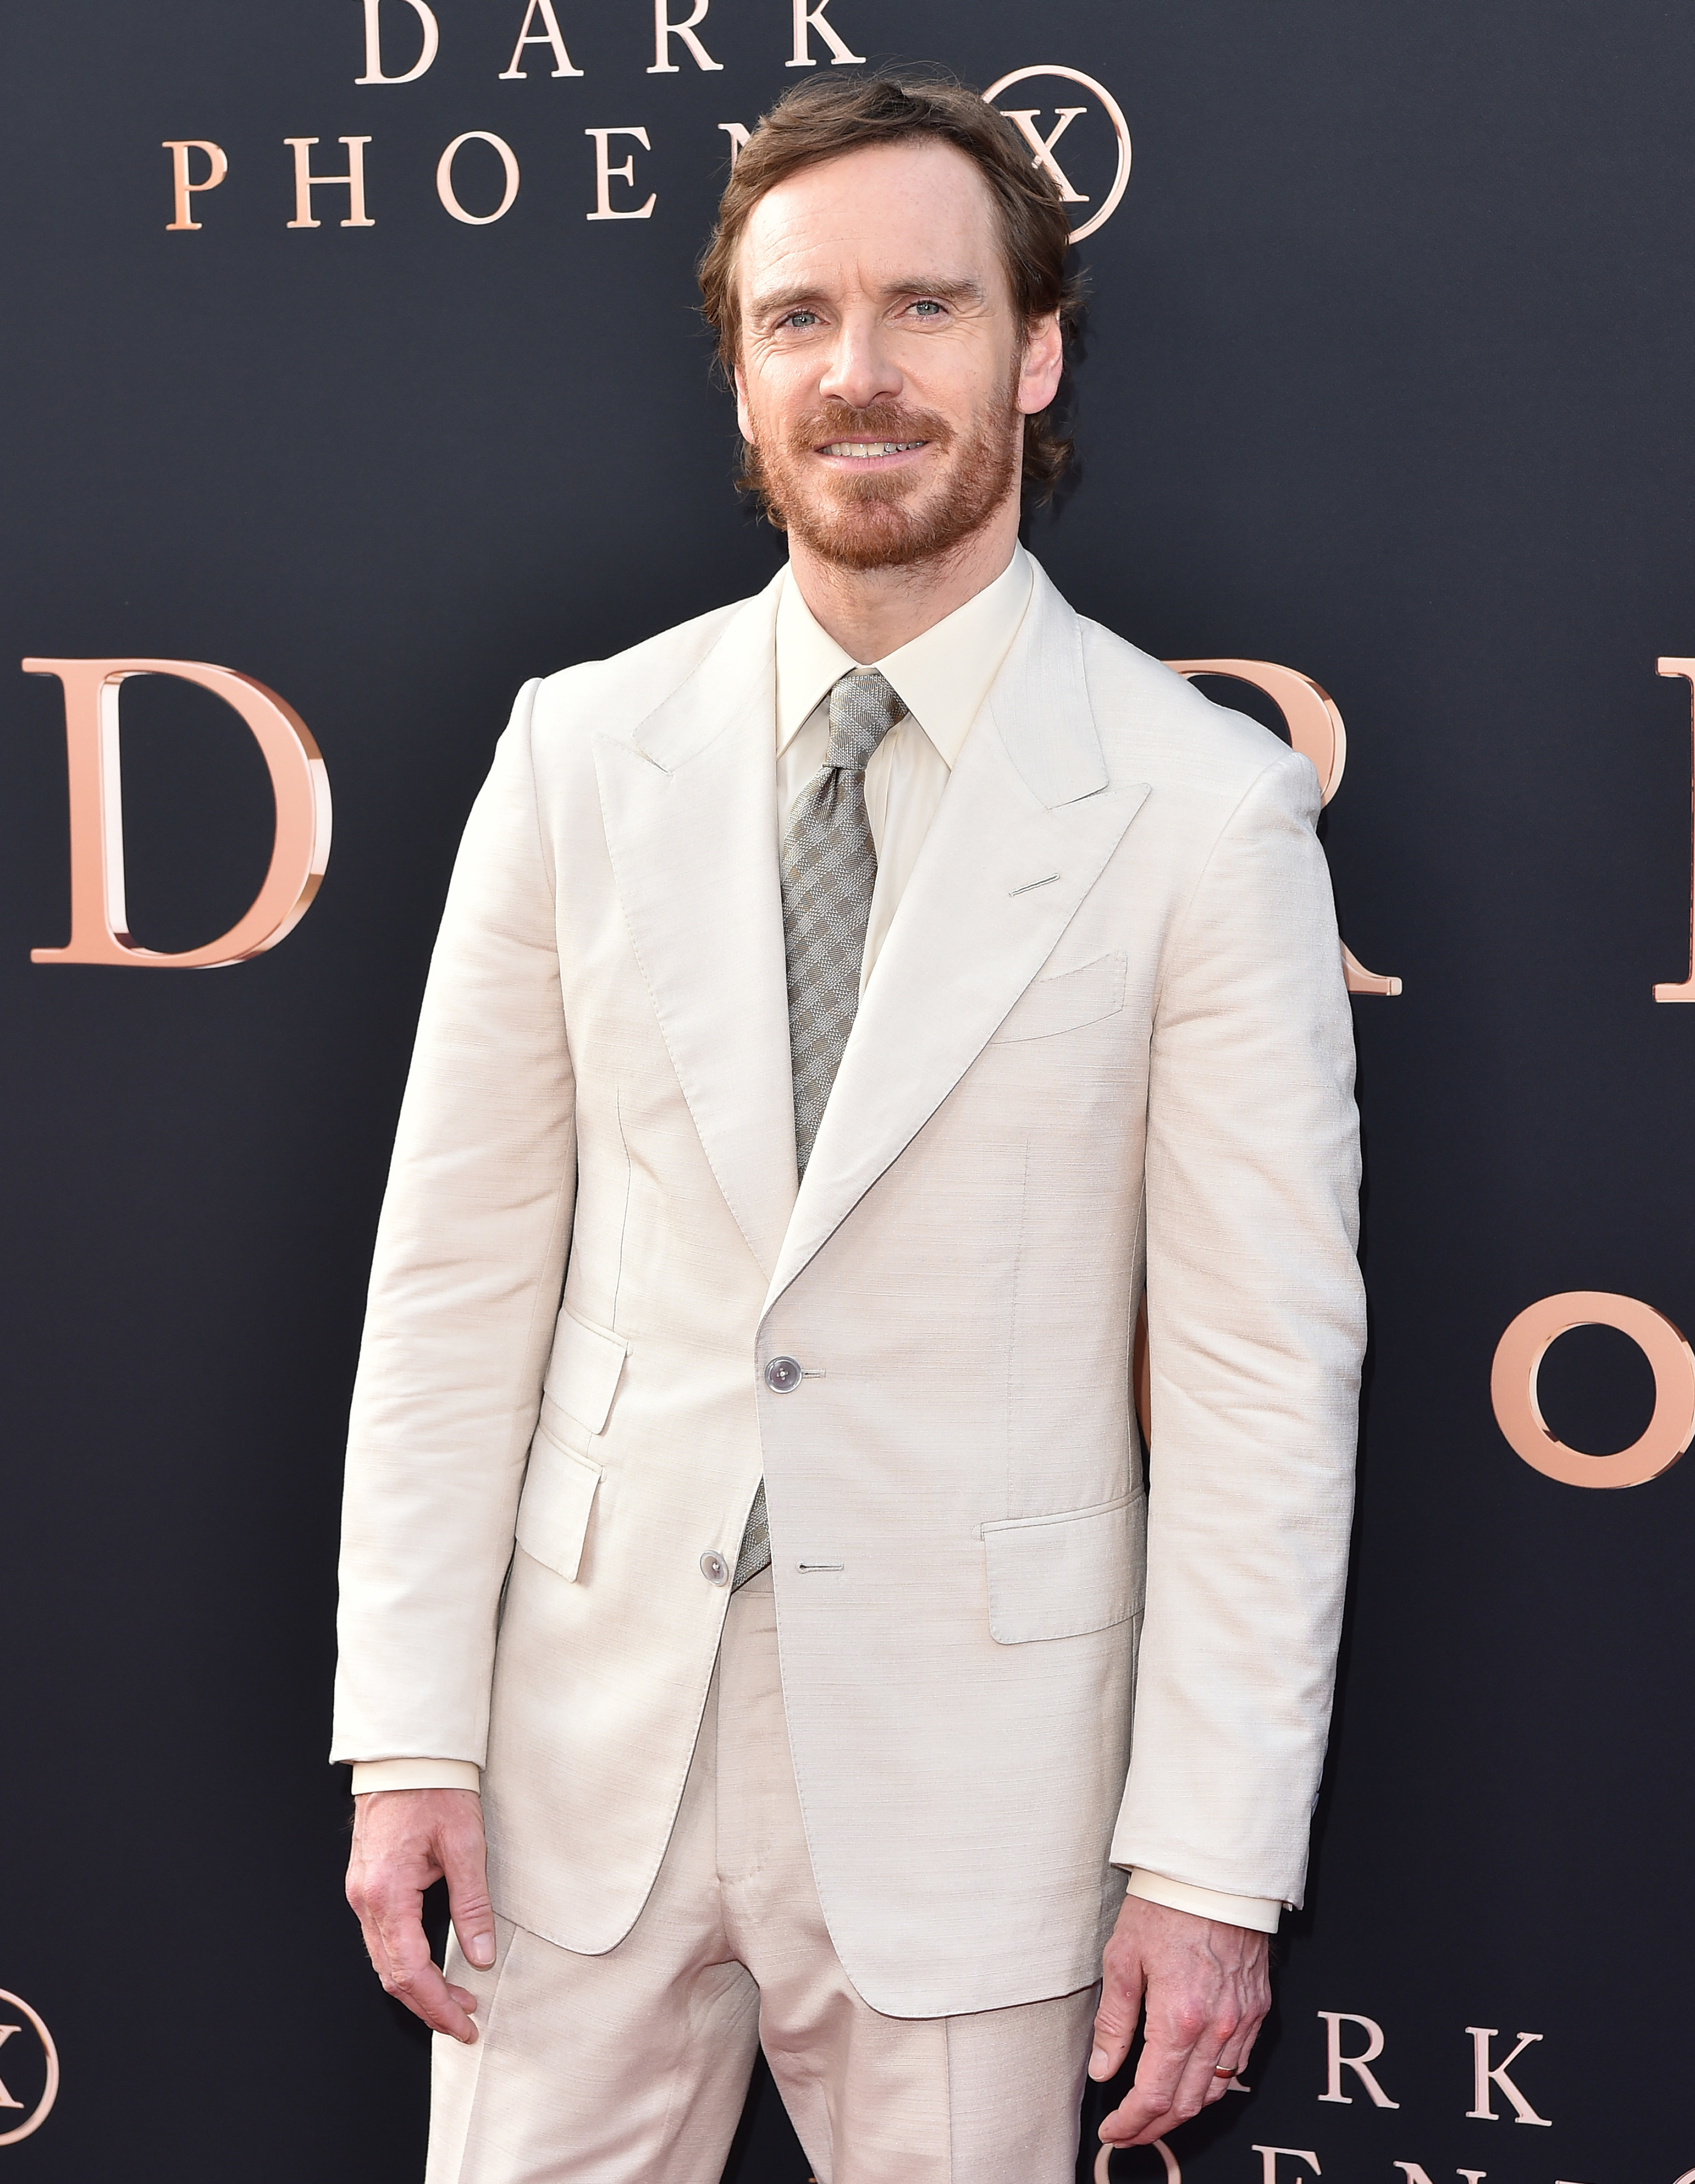 Michael Fassbender in a suit at an event for Dark Phoenix film